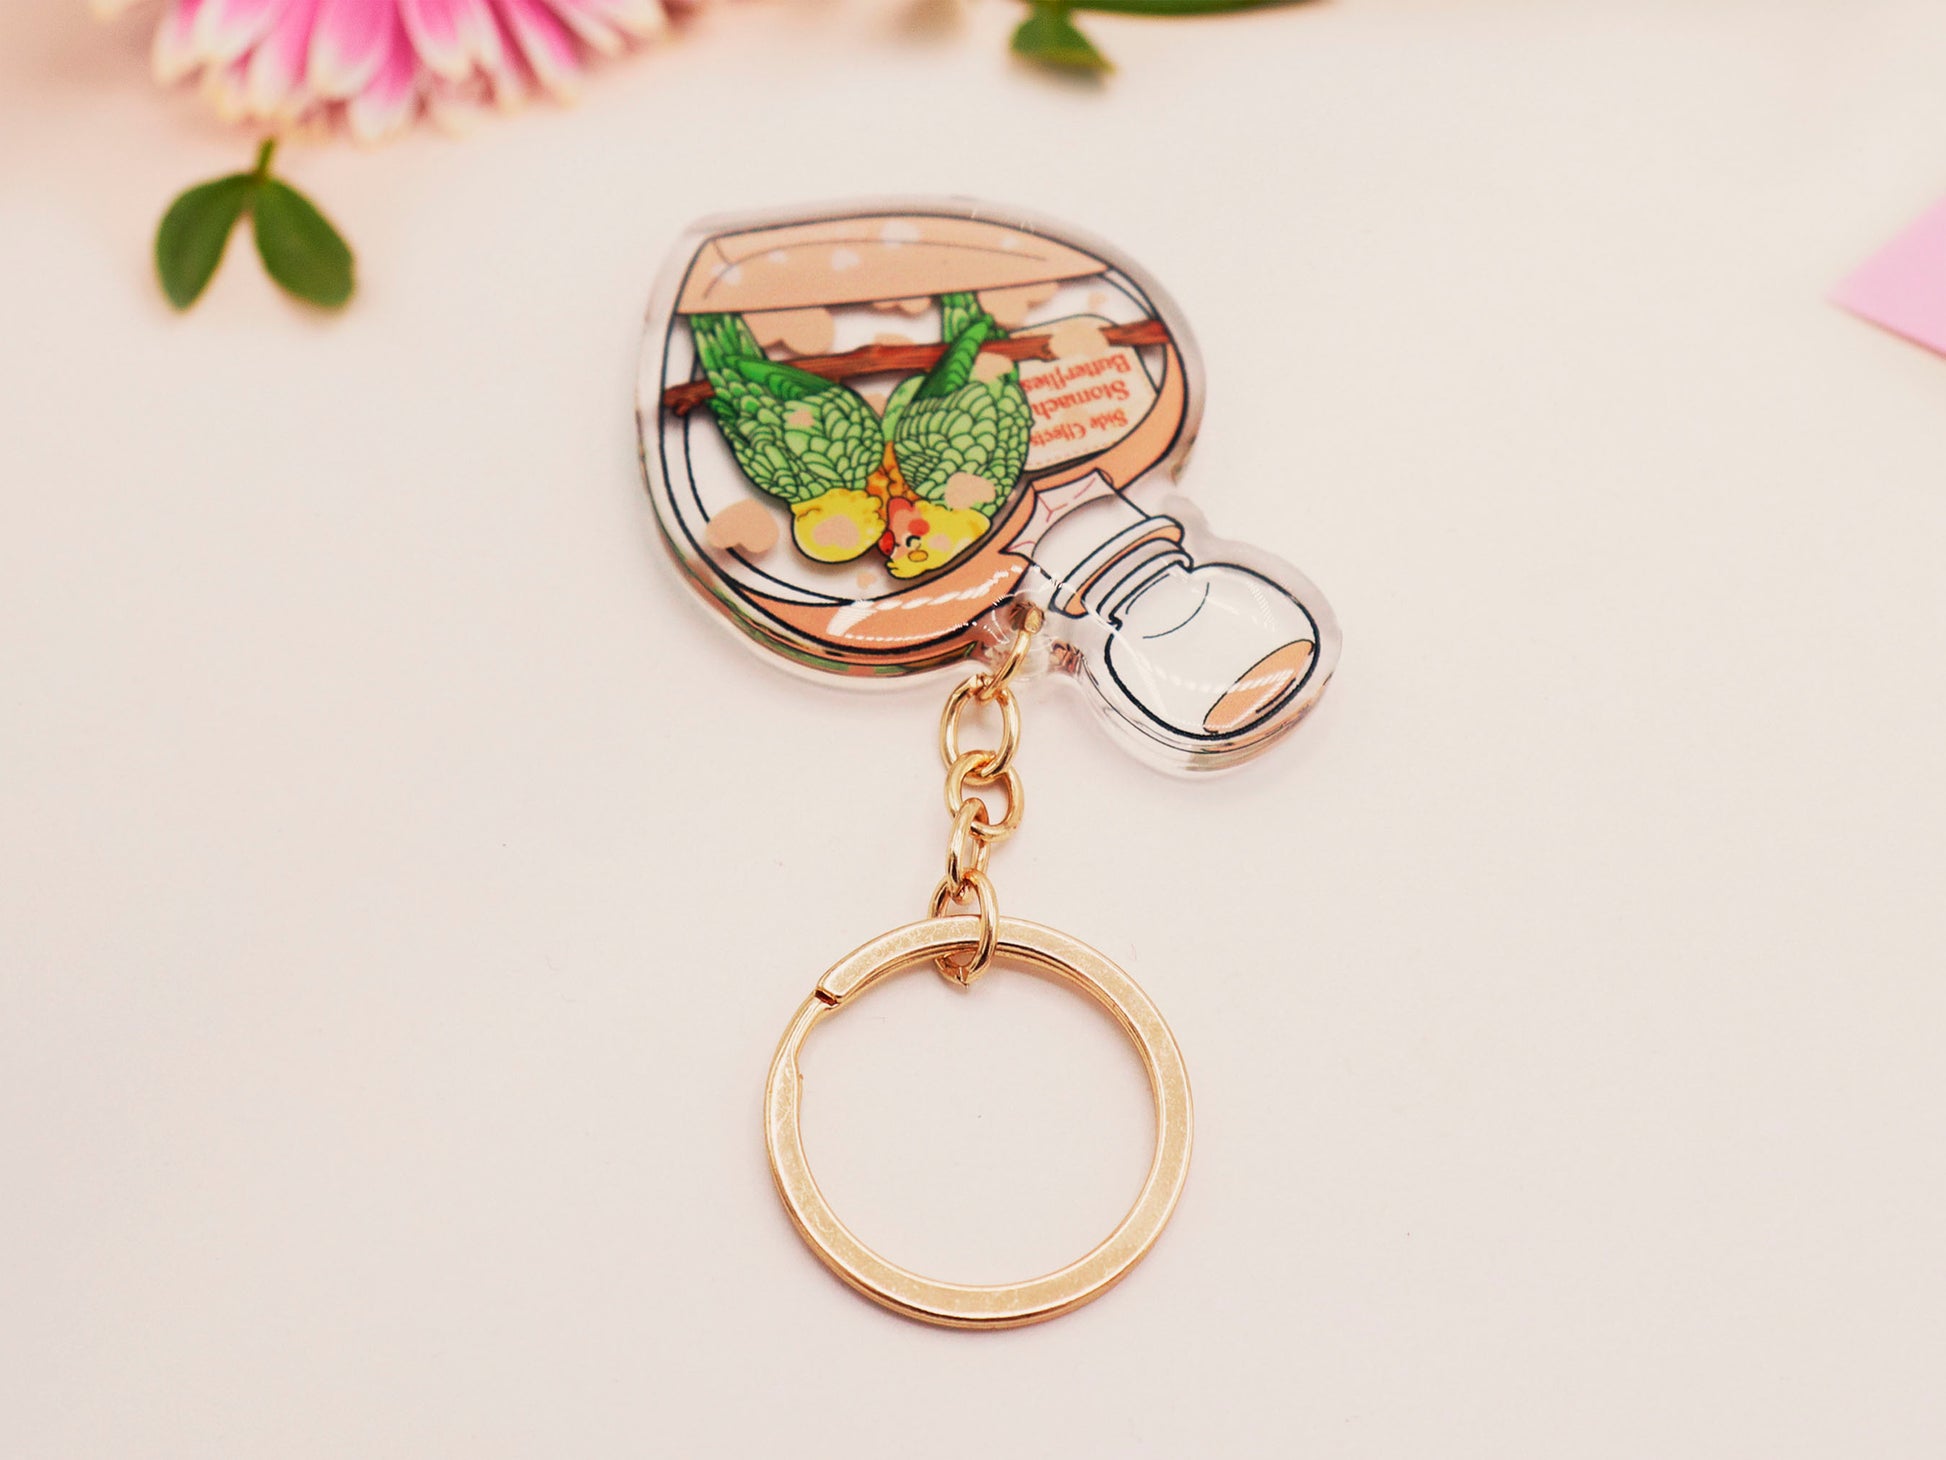 Clear acrylic double sided keyring with gold clasp, with a cute cartoon illustrated design of a heart shaped potion bottle containing two green and yellow love birds kissing each other labelled love potion xxx